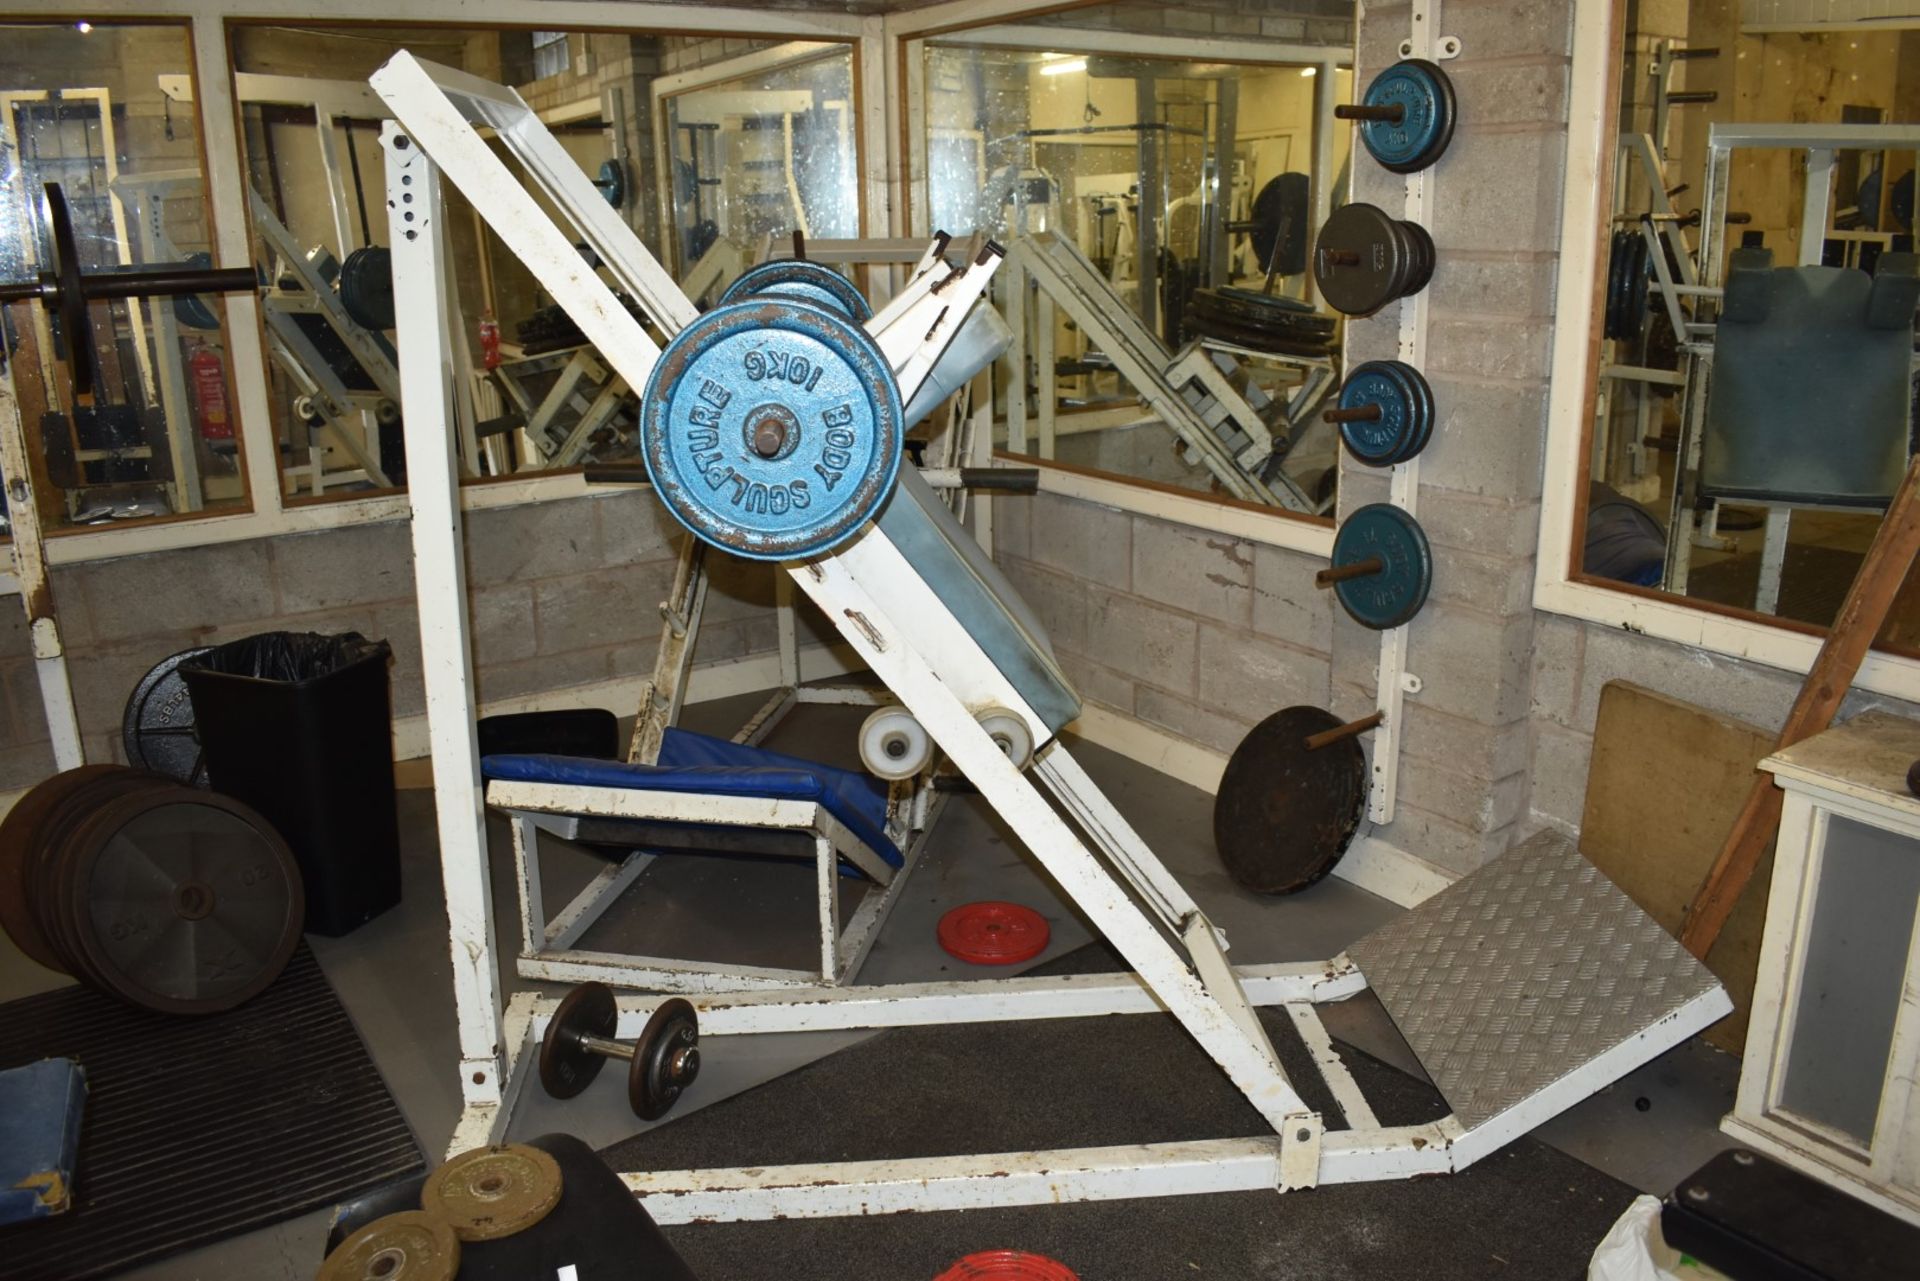 Contents of Bodybuilding and Strongman Gym - Includes Approx 30 Pieces of Gym Equipment, Floor Mats, - Image 20 of 31